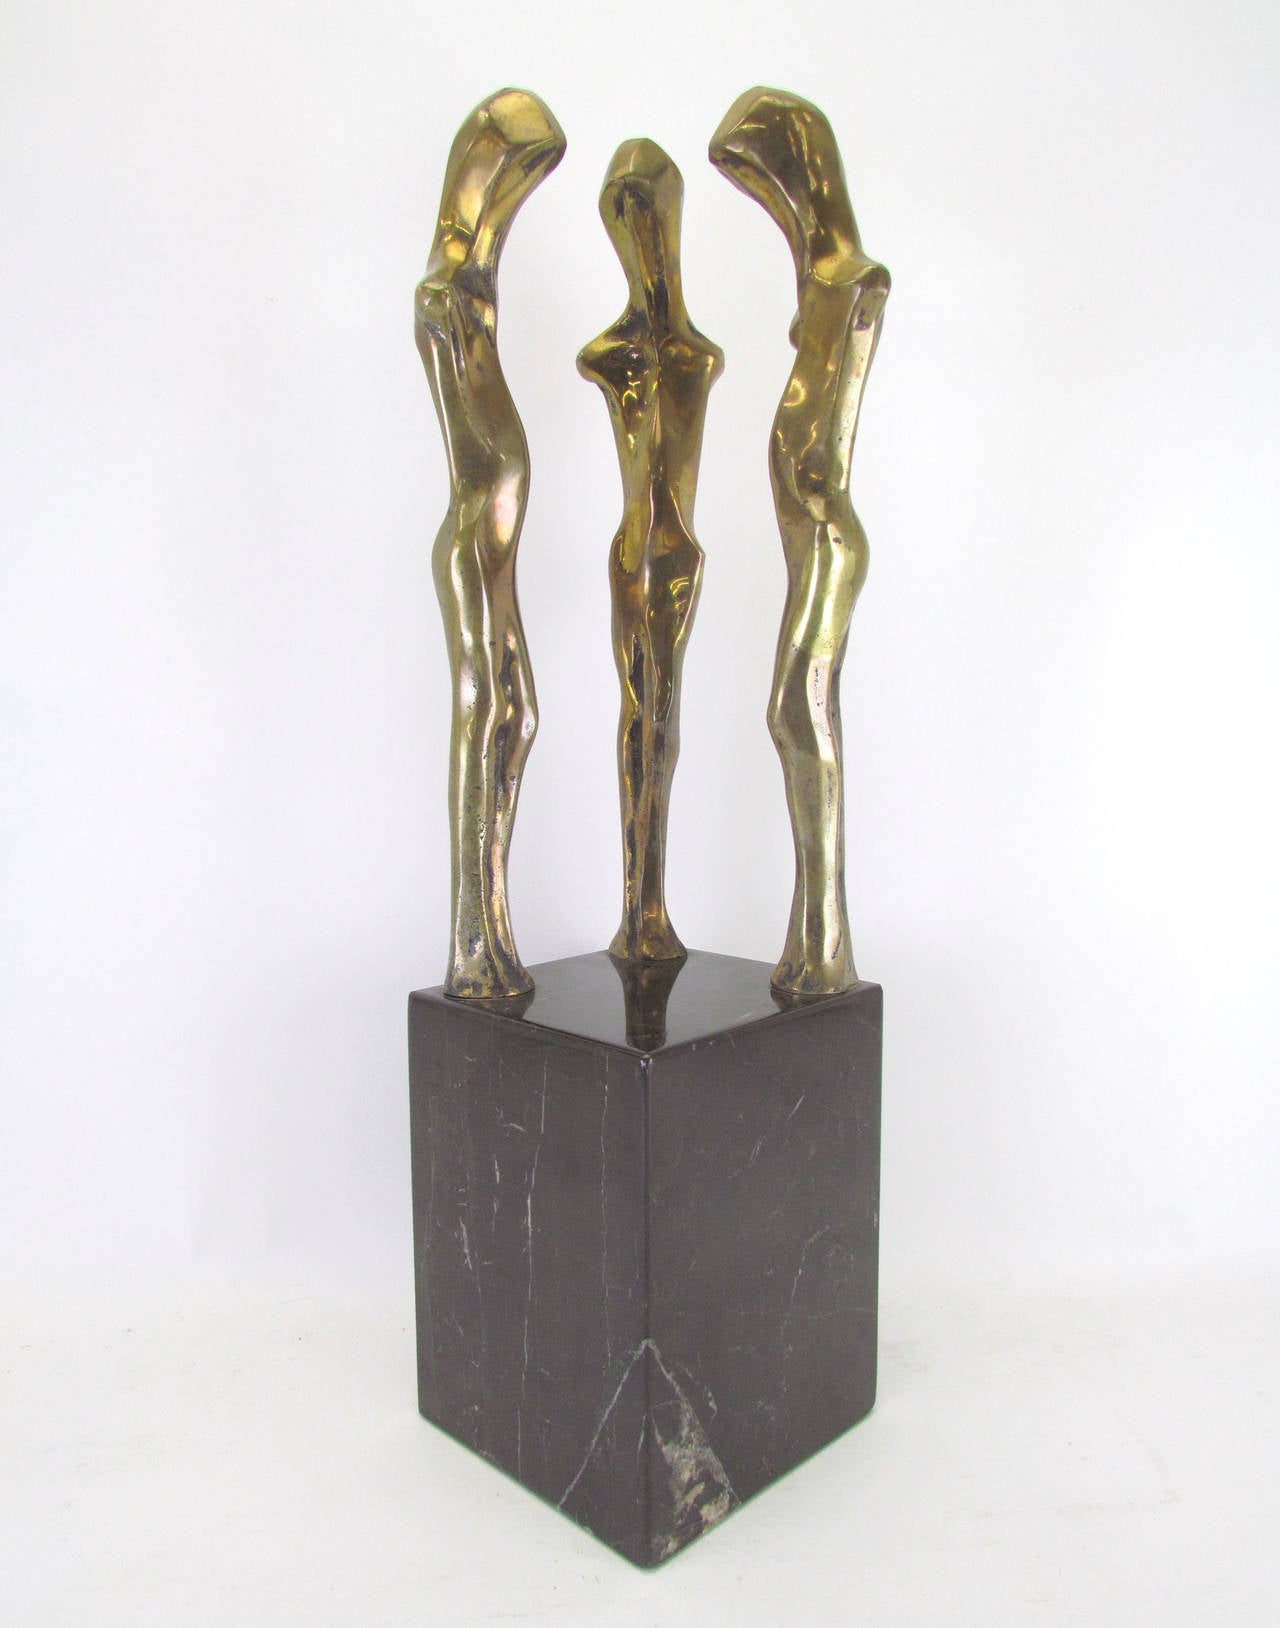 Modernist sculpture of three abstract standing figures in bronze, affixed to a marble base. Signed Davidson.

Measures: 19